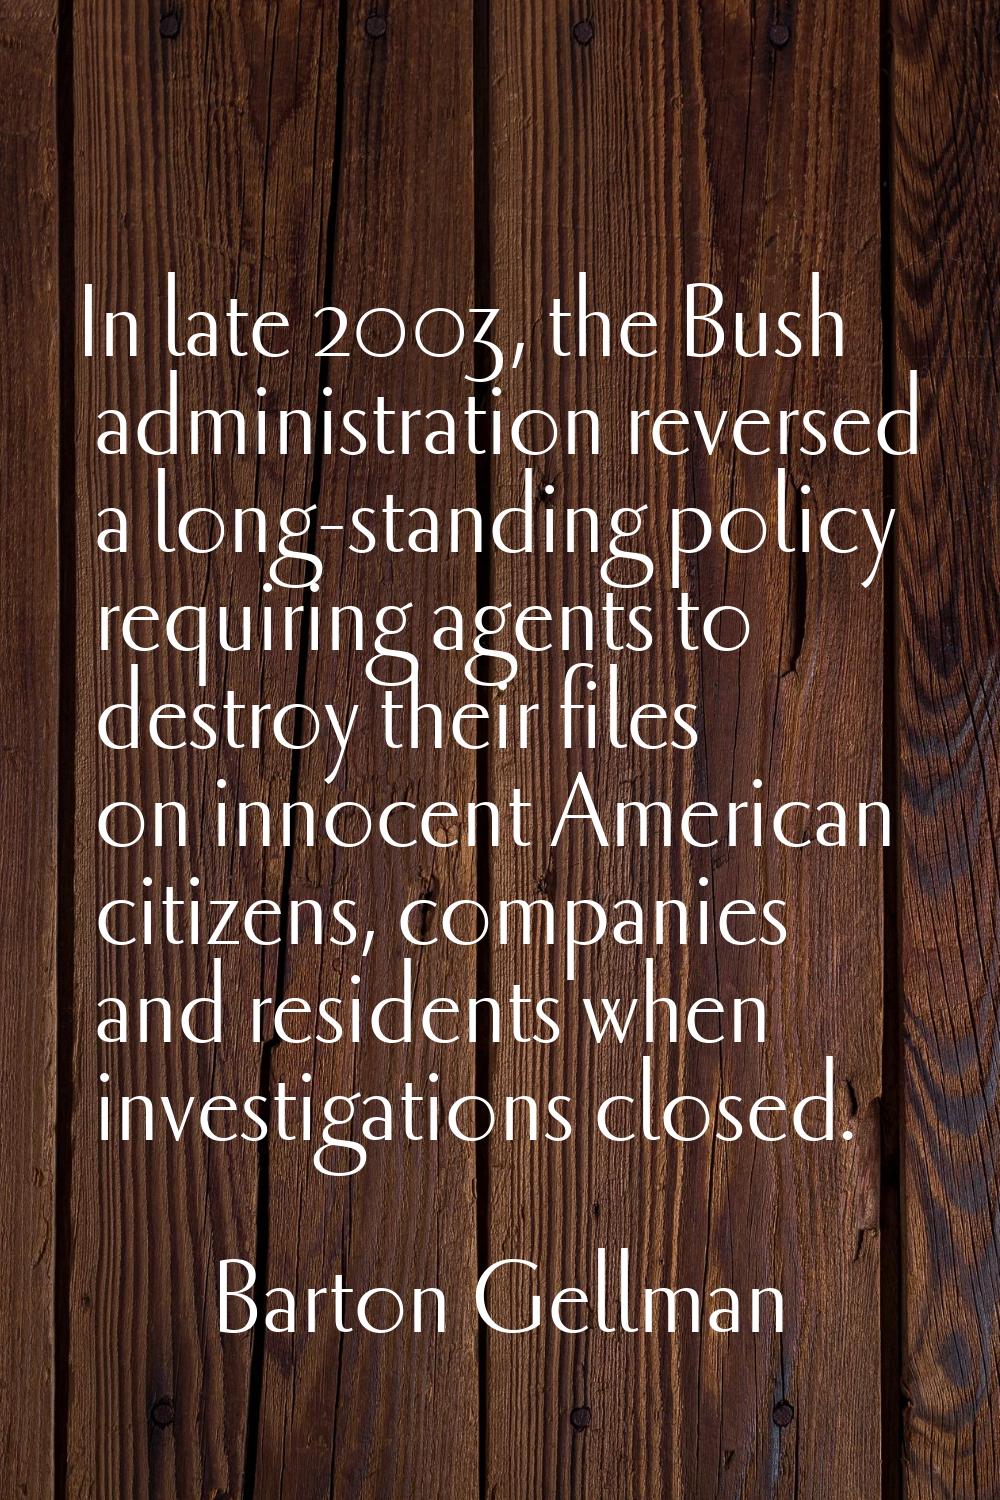 In late 2003, the Bush administration reversed a long-standing policy requiring agents to destroy t